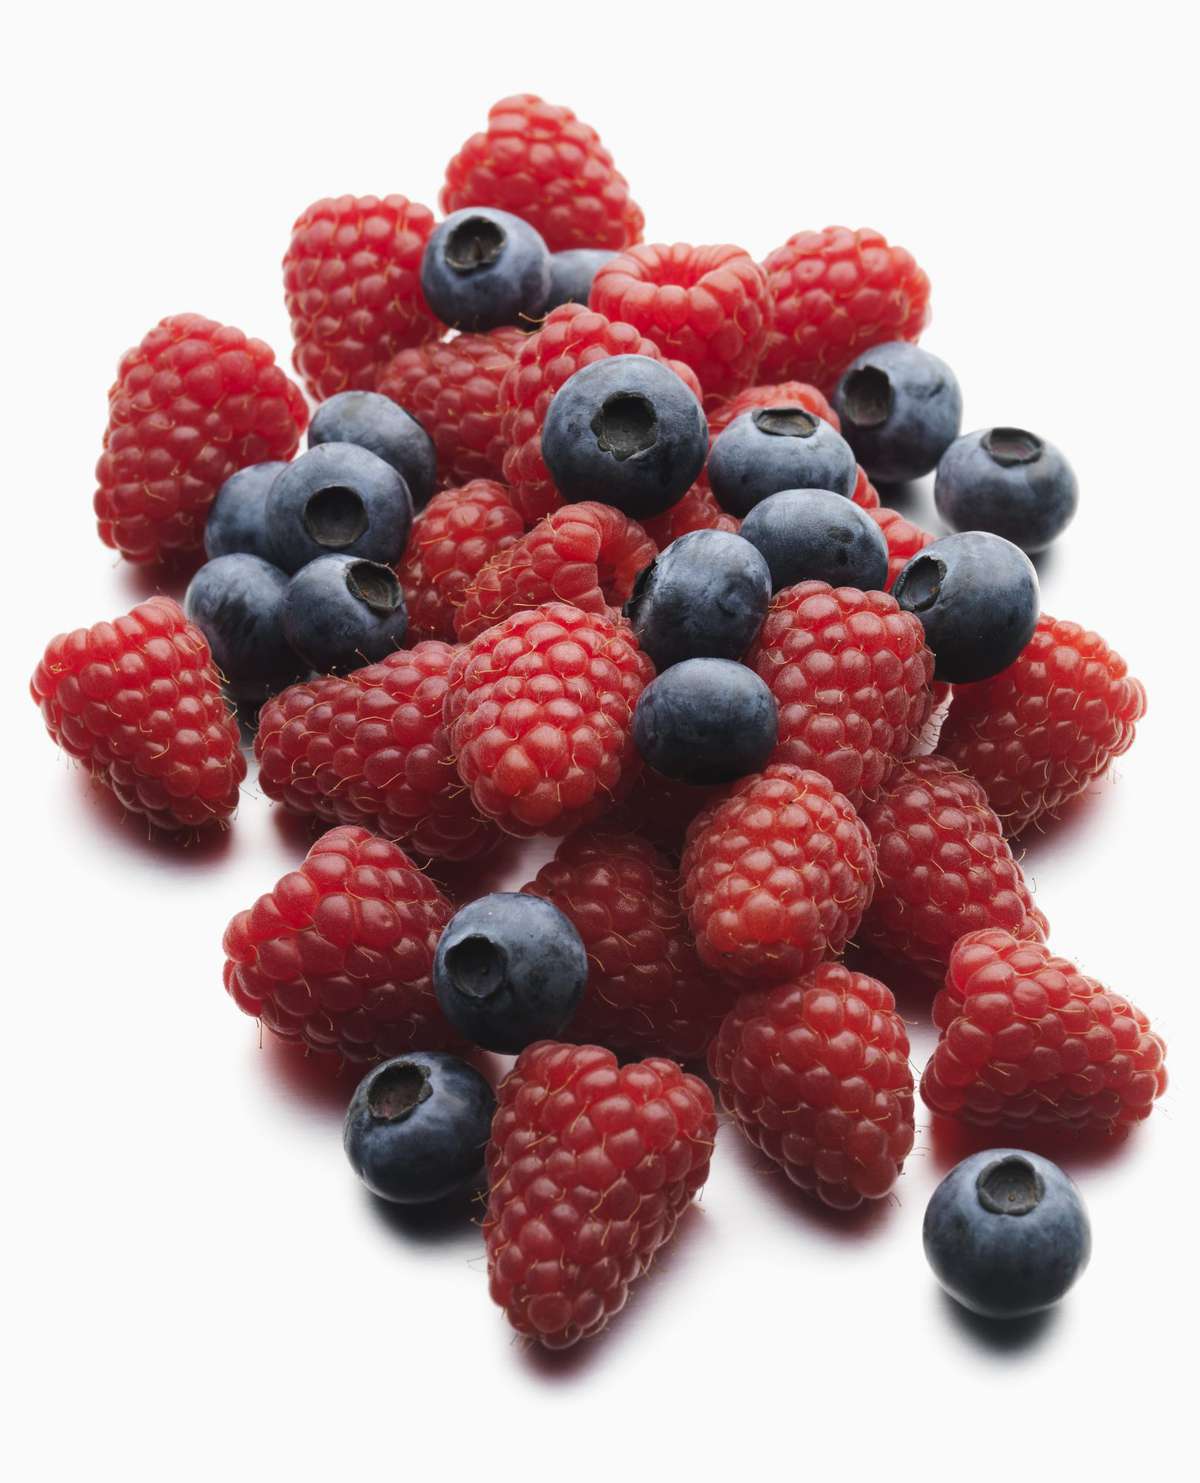 A pile of fresh raspberries and blueberries on a white background